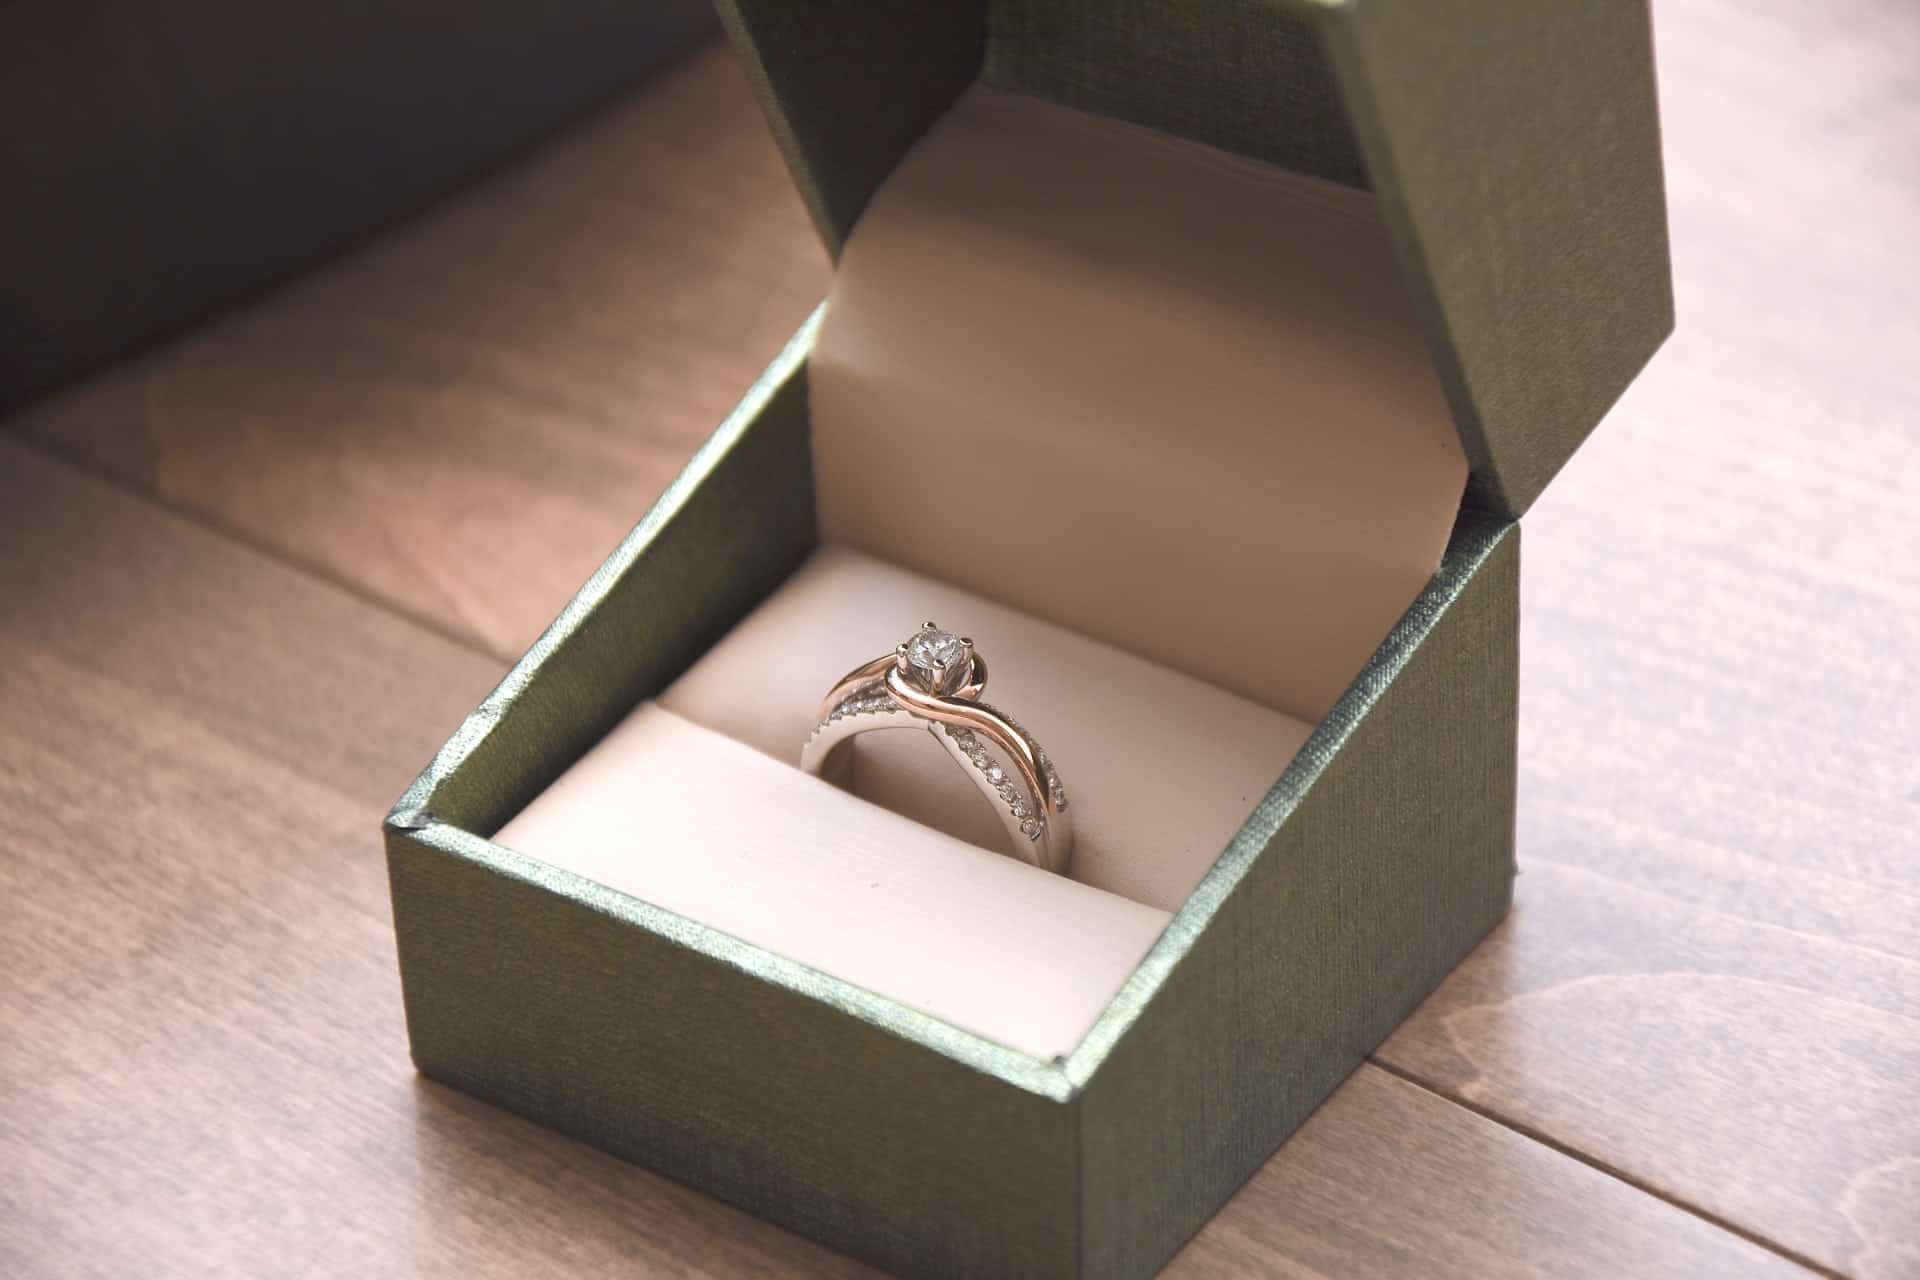 Tips for Choosing an Engagement Ring You’ll Love Forever